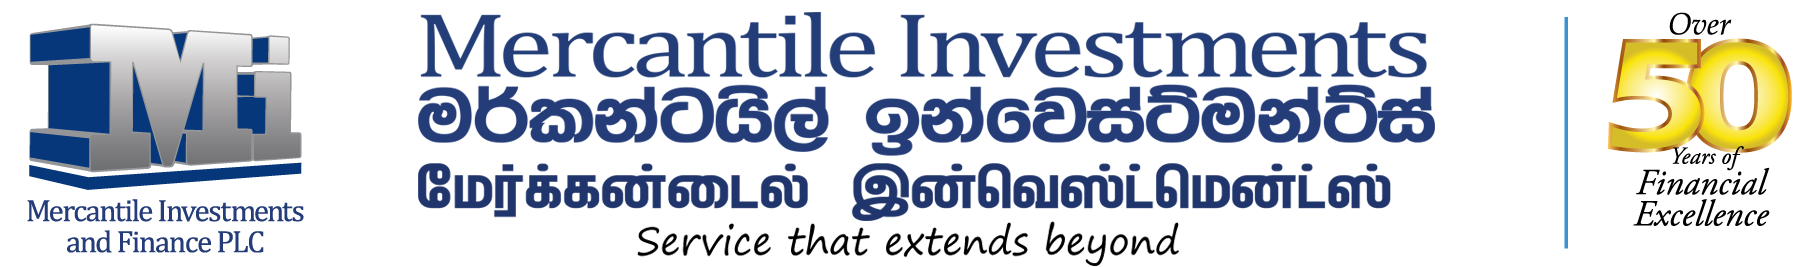 Mercantile Investments And Finance Brand Logo